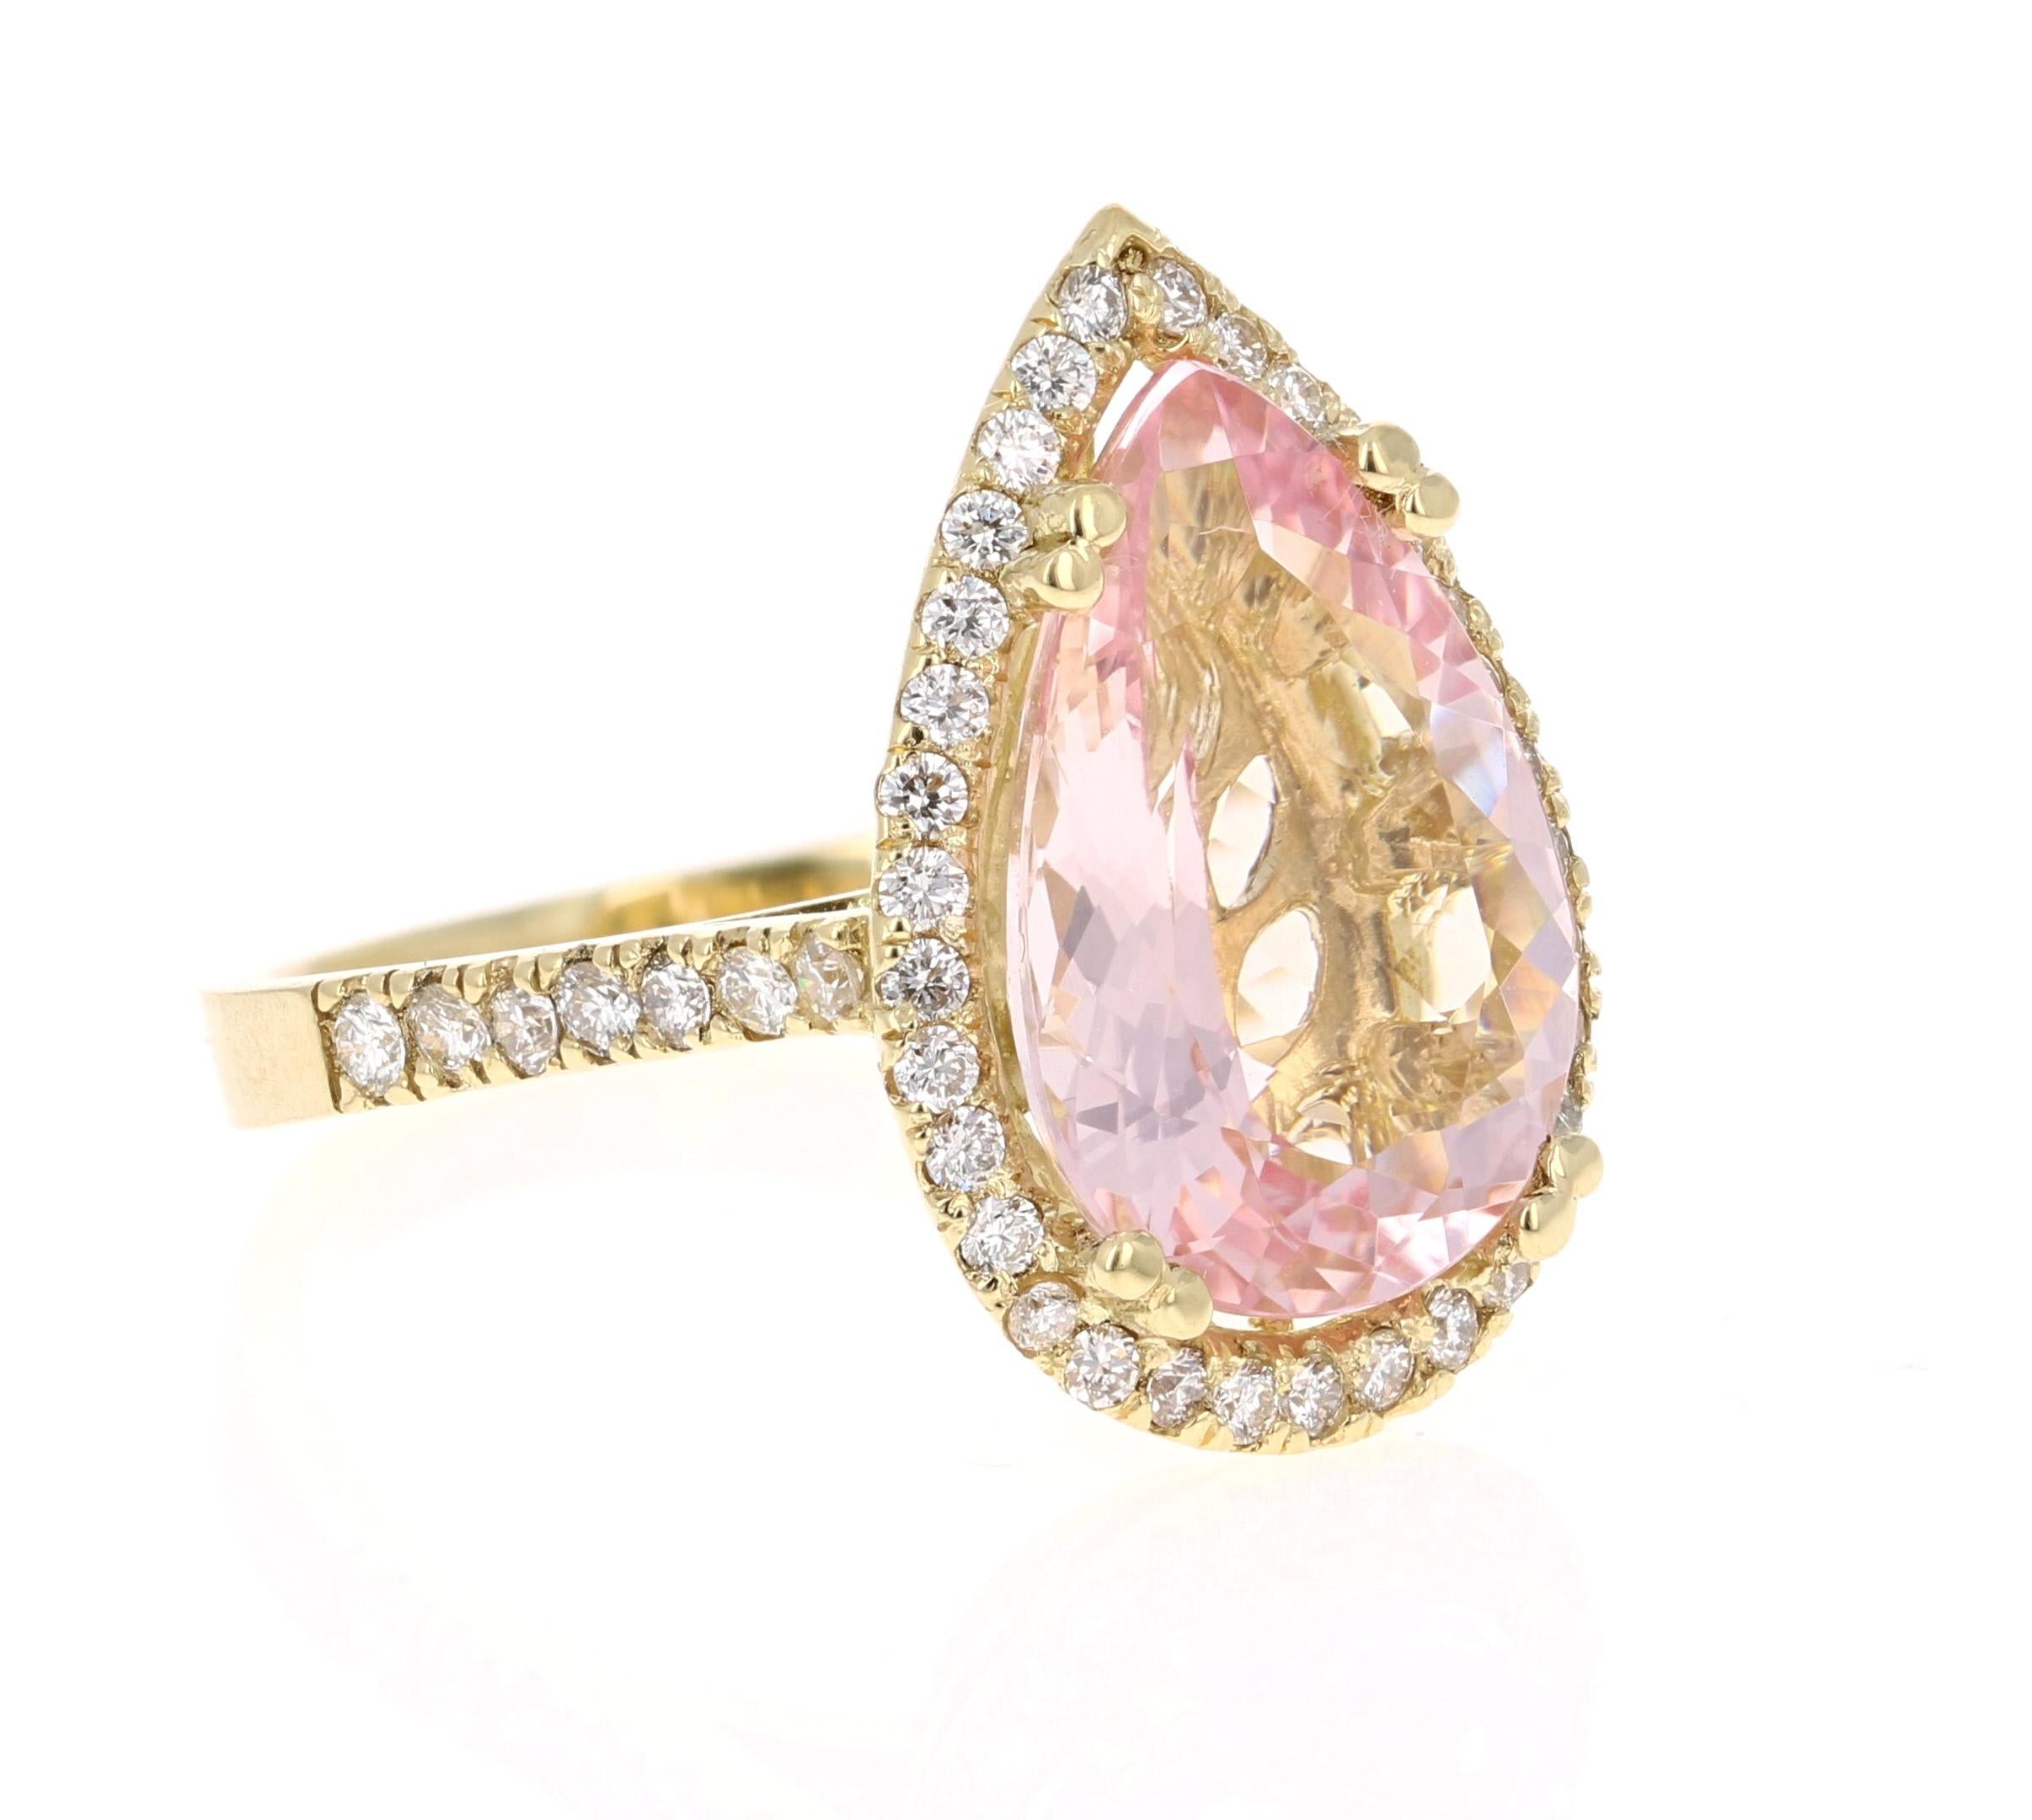 Gorgeous and Unique Morganite Diamond Ring! 

This Morganite ring has a gorgeous 5.59 Carat Pear Cut Pink Morganite and is surrounded by a halo of 49 Round Cut Diamonds that weigh 0.72 Carats.  The diamonds have a clarity and color of VS-H. The